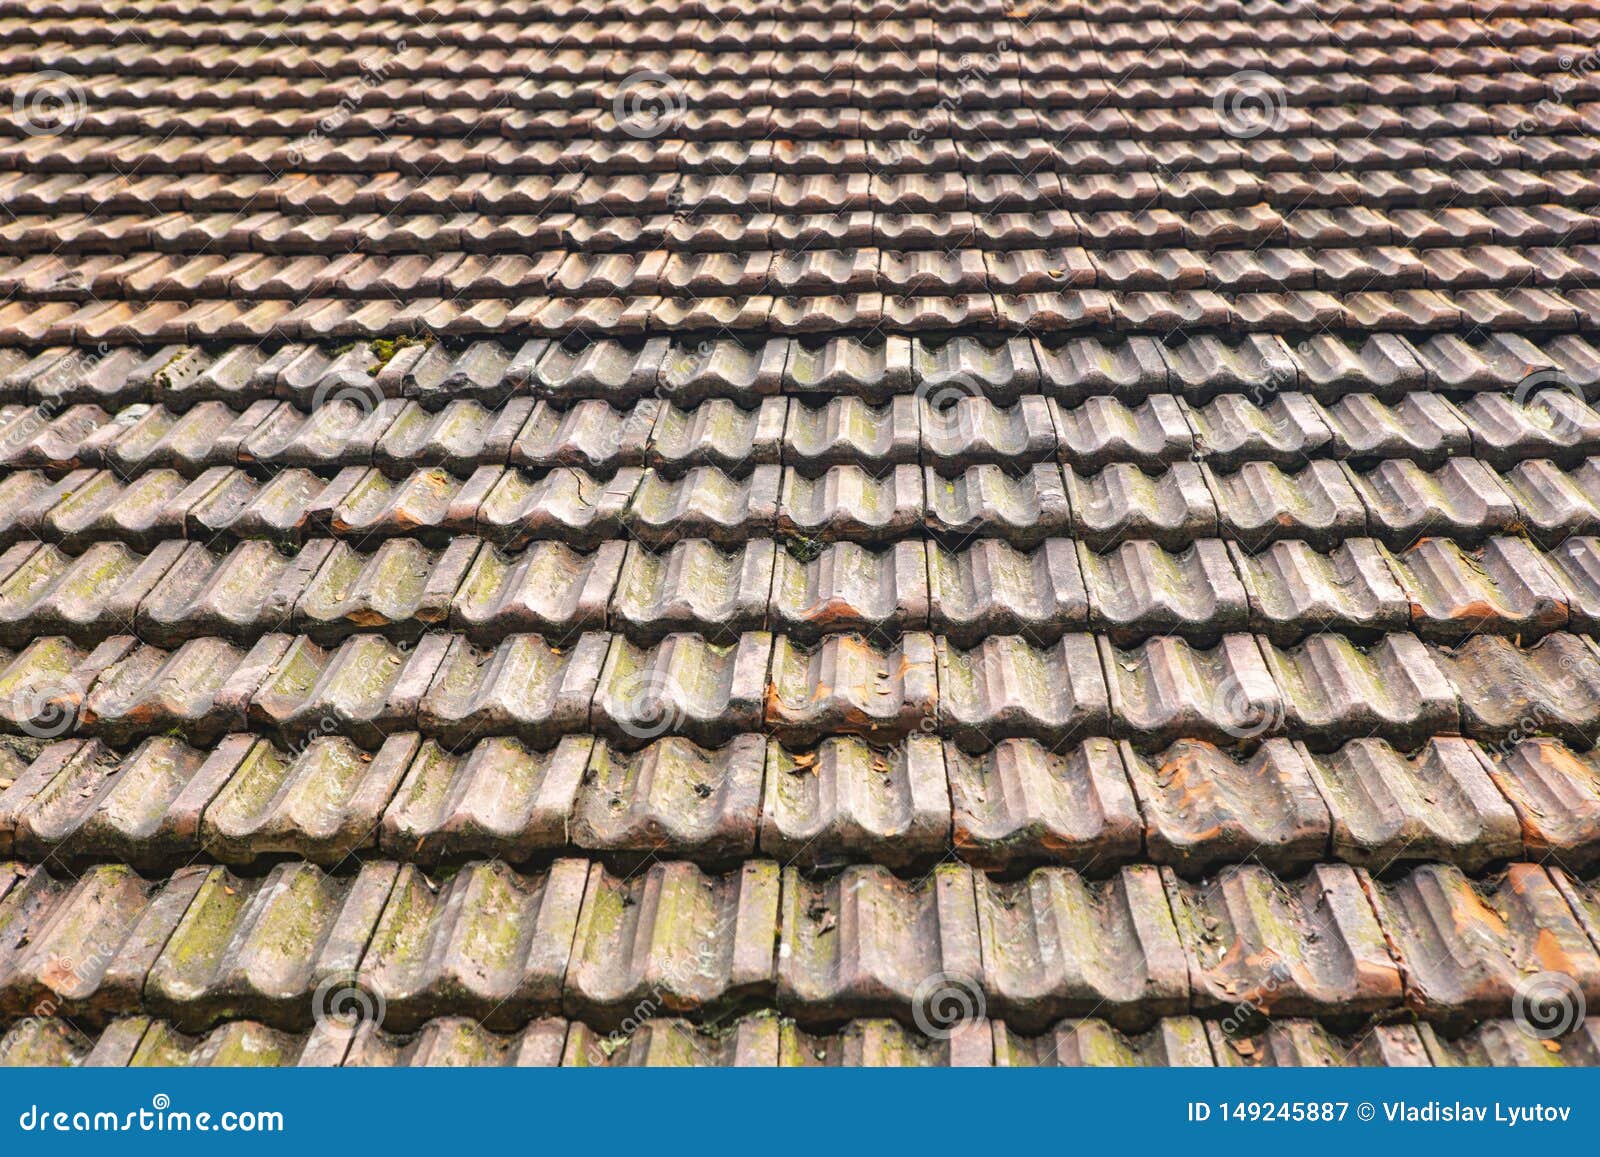 Close Up Of Old Rubber Roof Tiles Stock Image Image Of Grunge